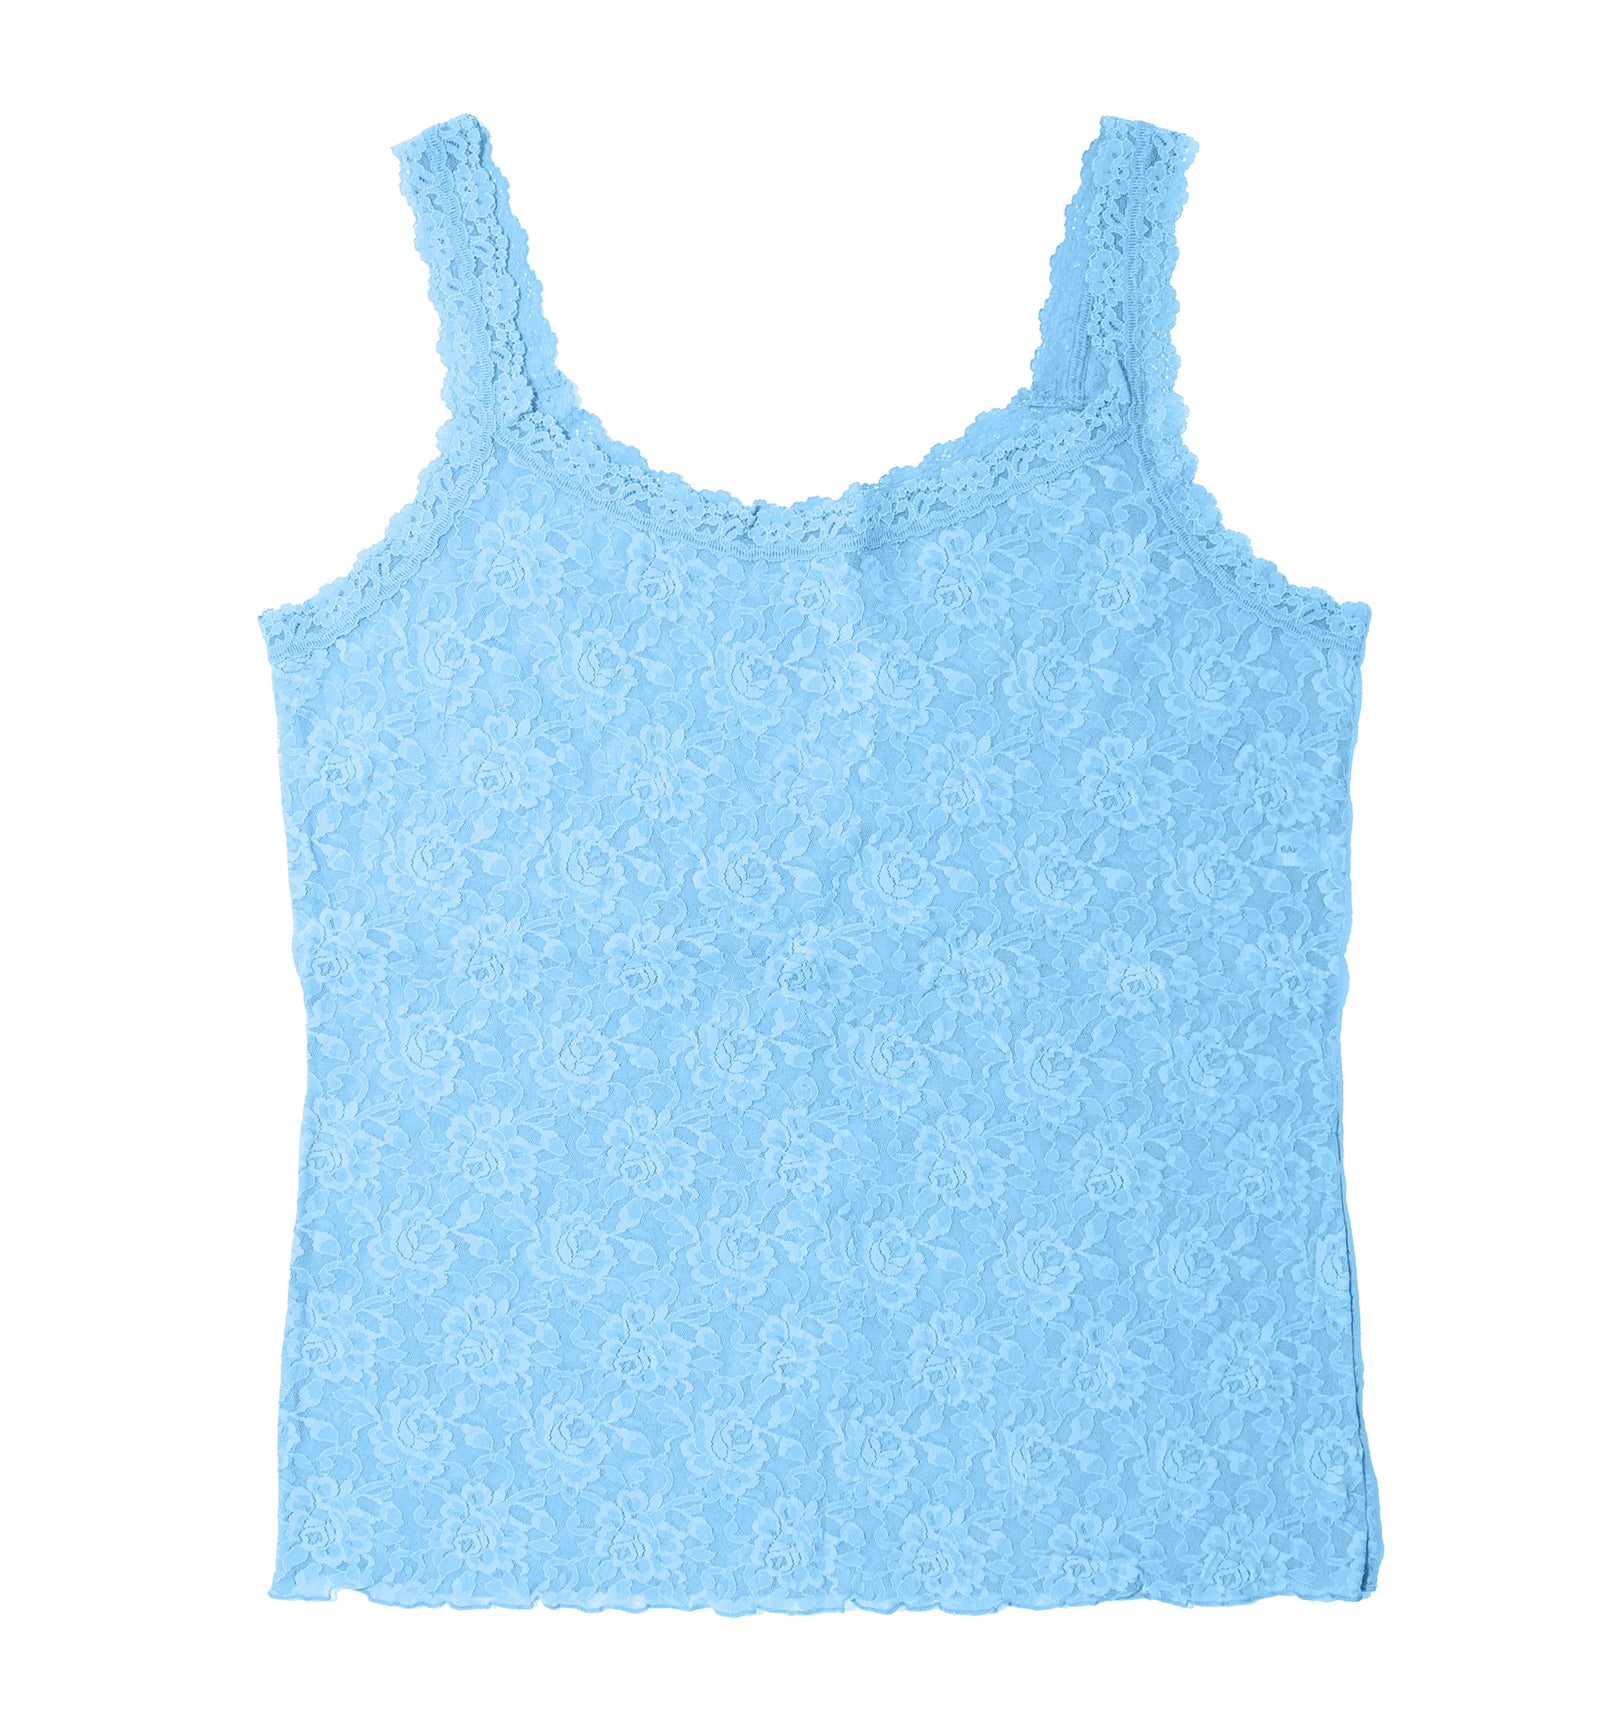 Hanky Panky Signature Lace Unlined Camisole PLUS (1390LX),1X,Partly Cloudy - Partly Cloudy,1X